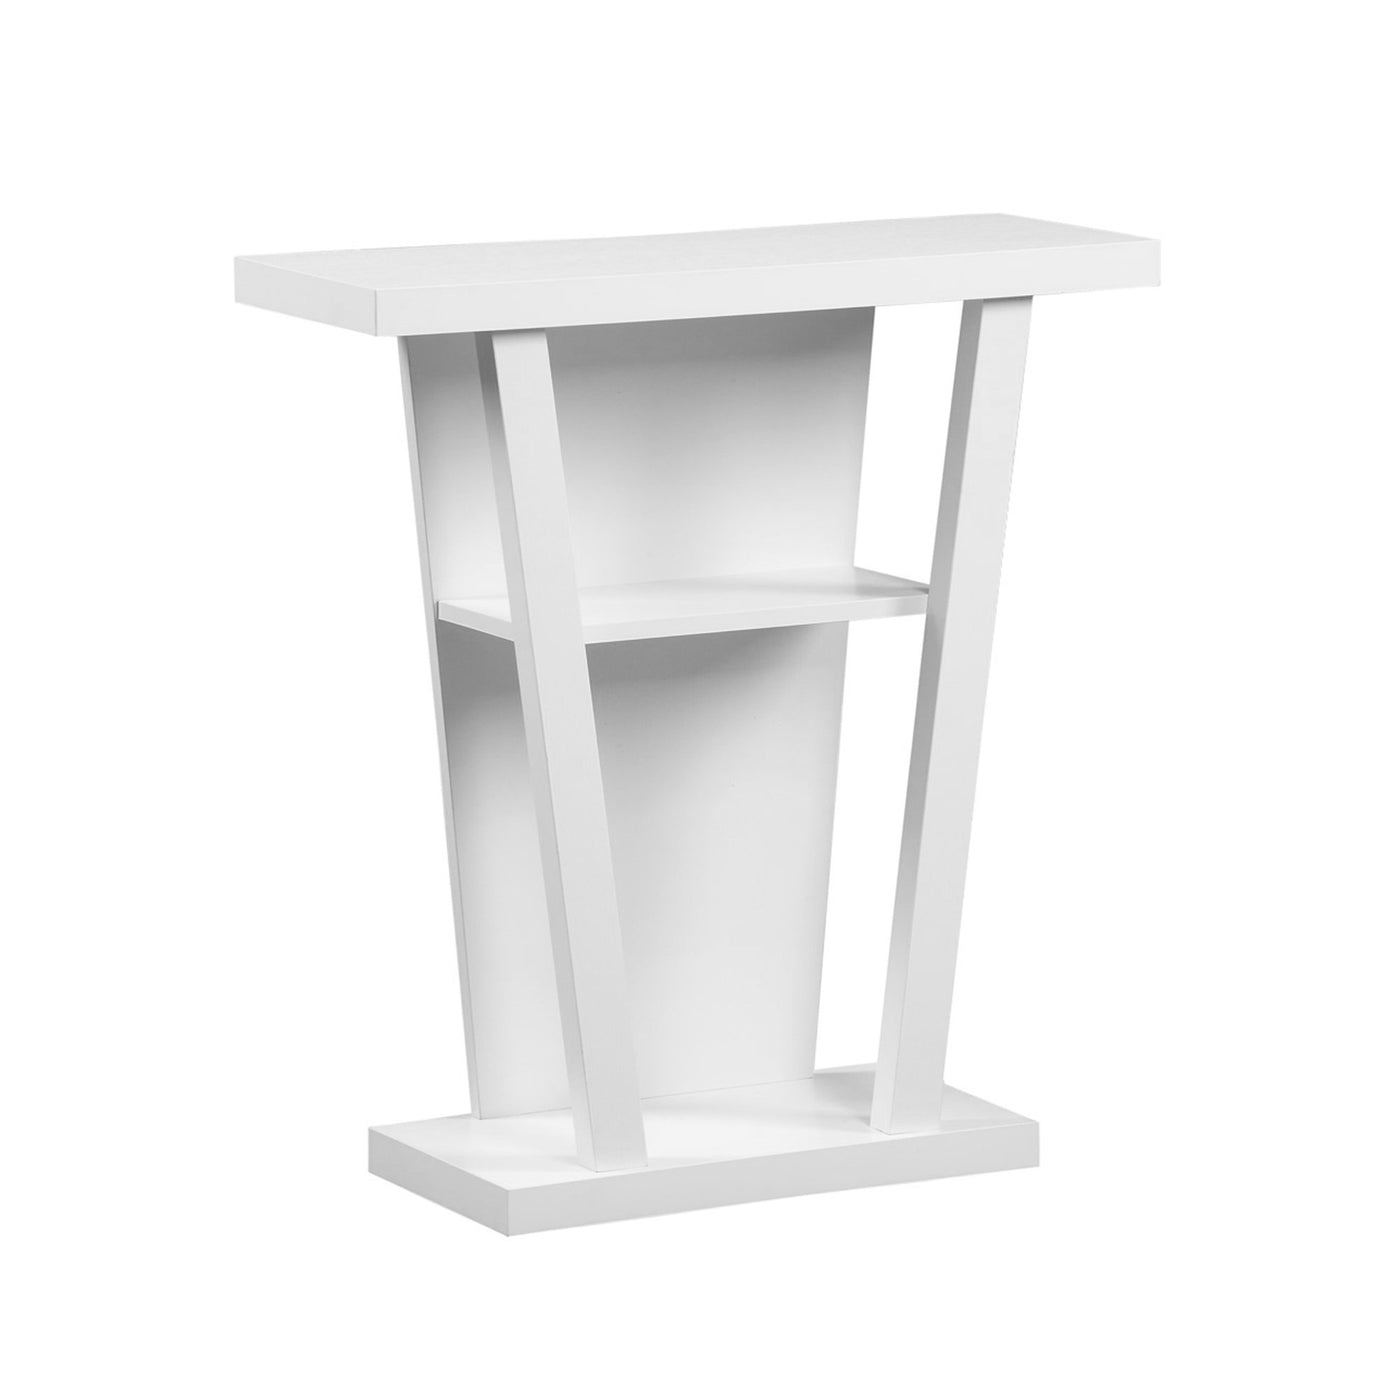 34" White End Table With Two Shelves